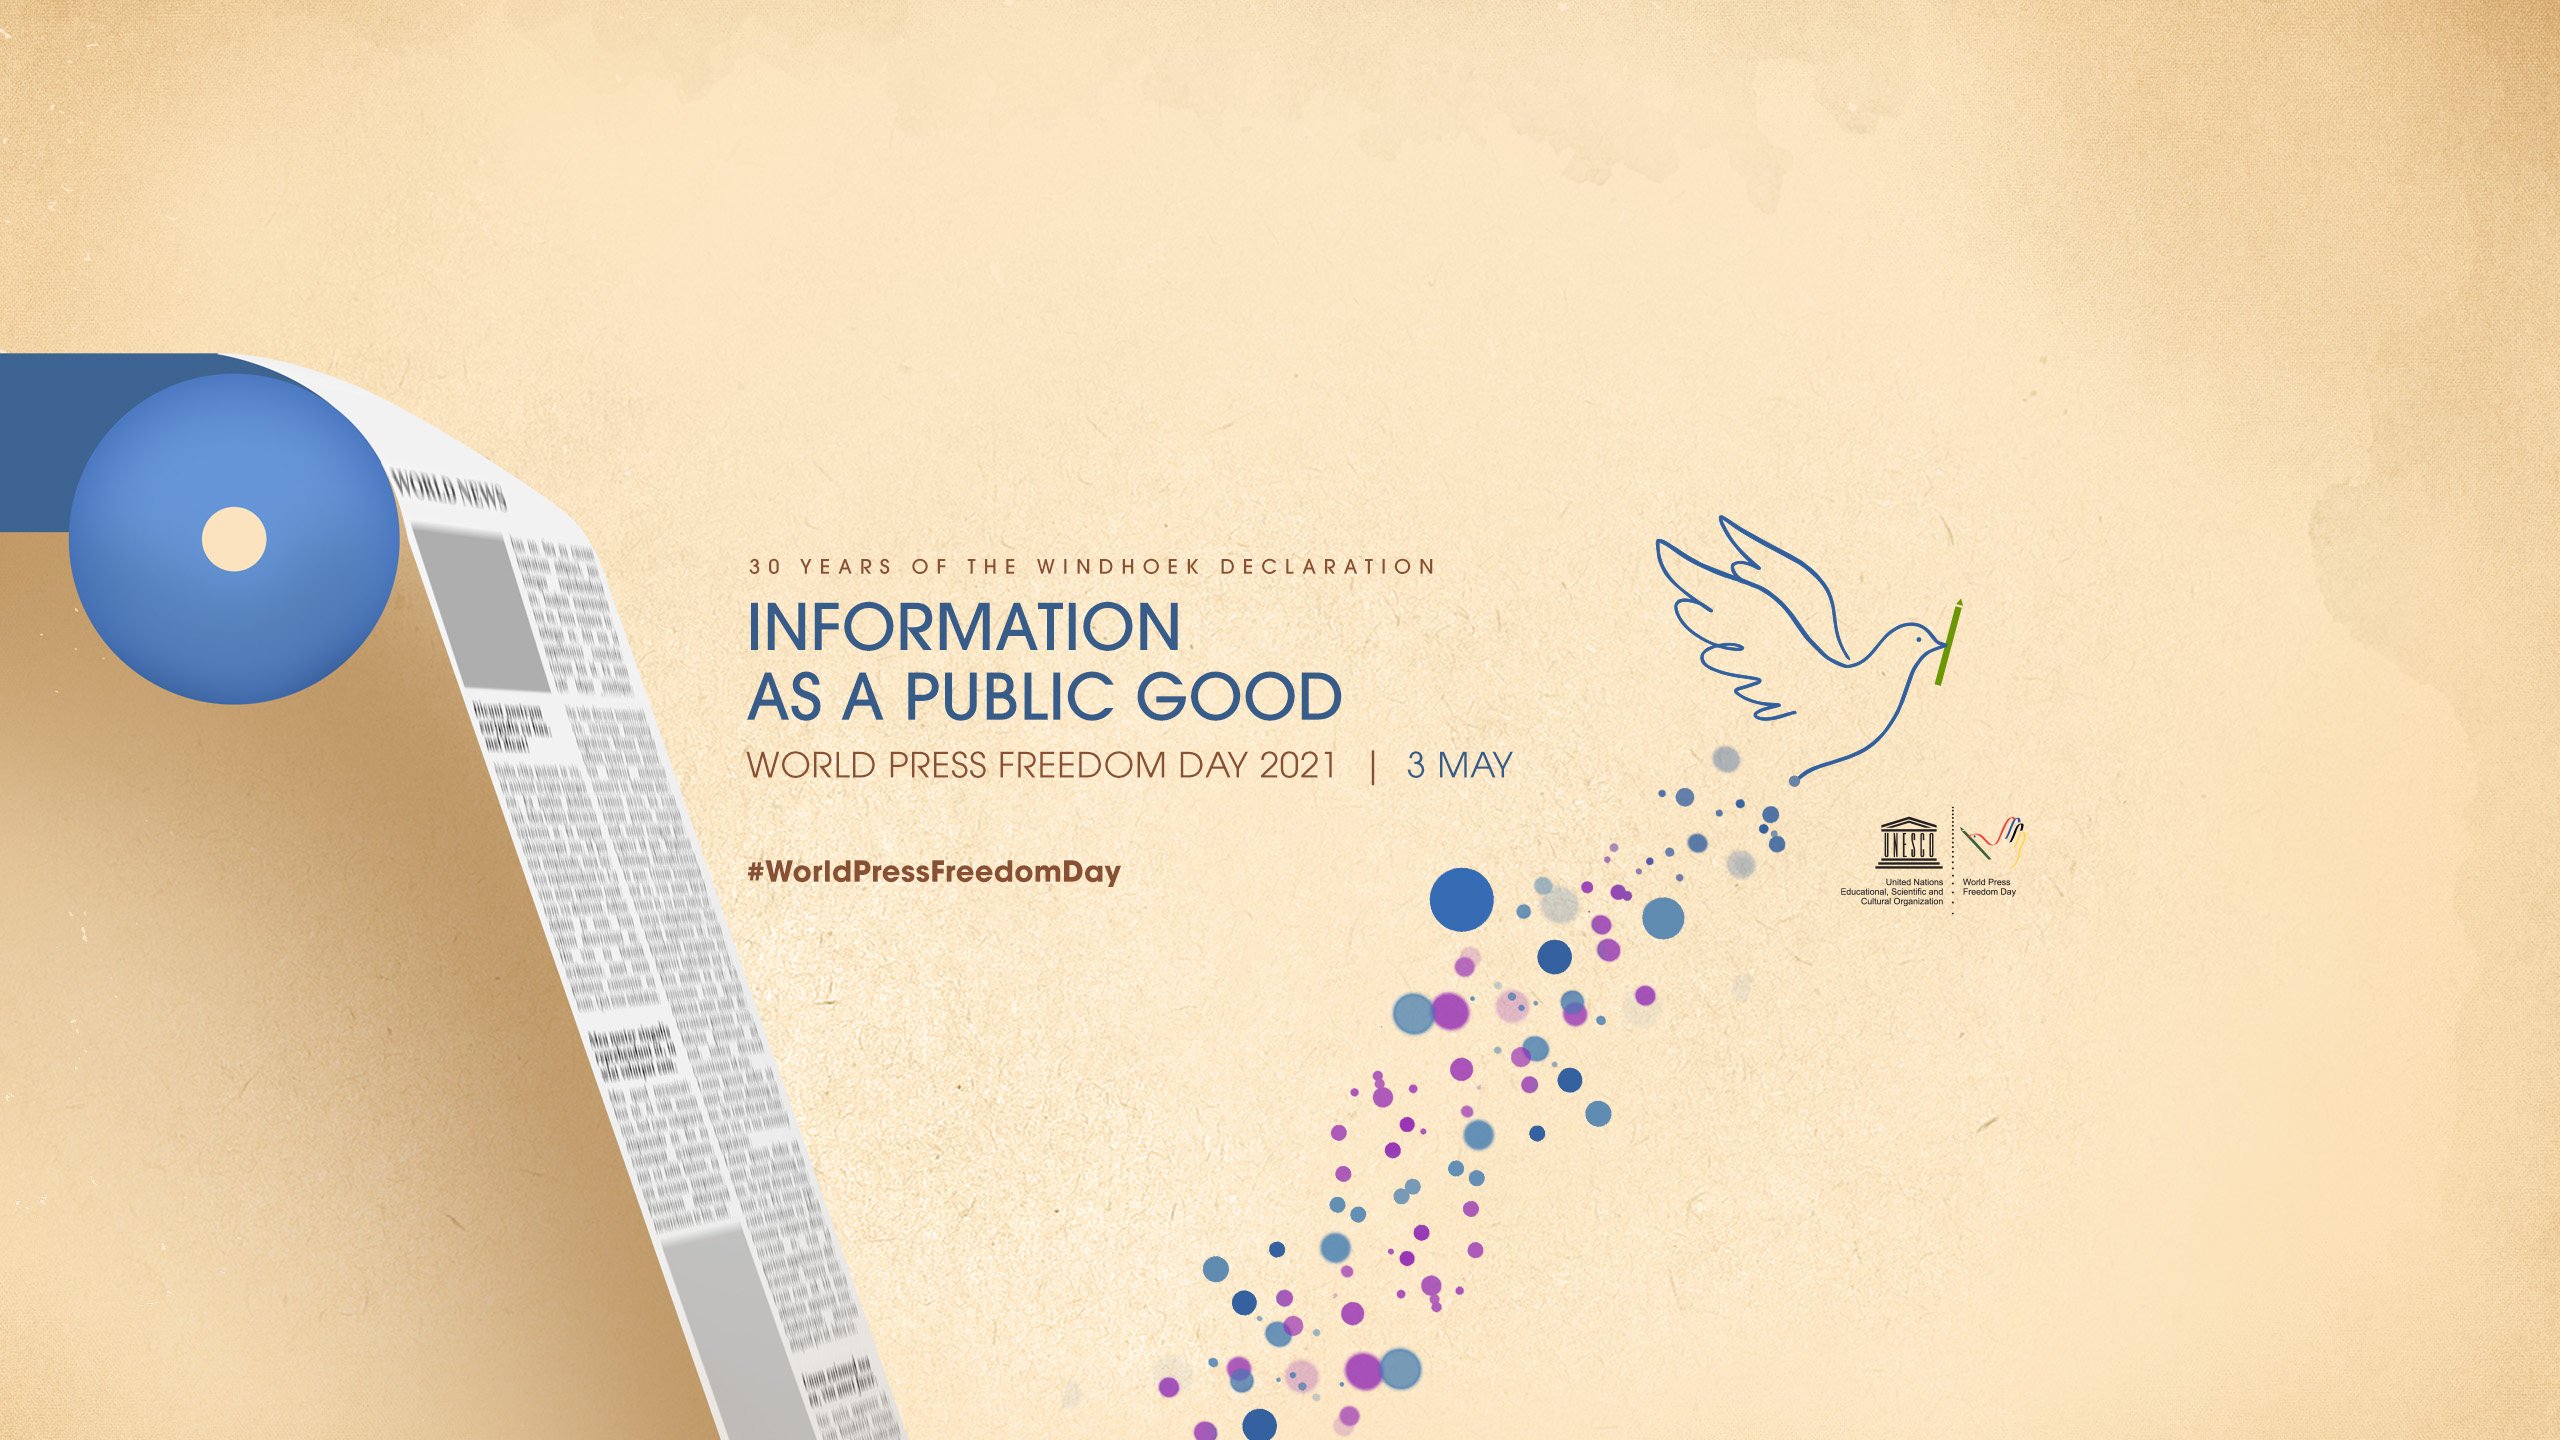 This year’s World Press Freedom Day theme is “Information as a Public Good”.